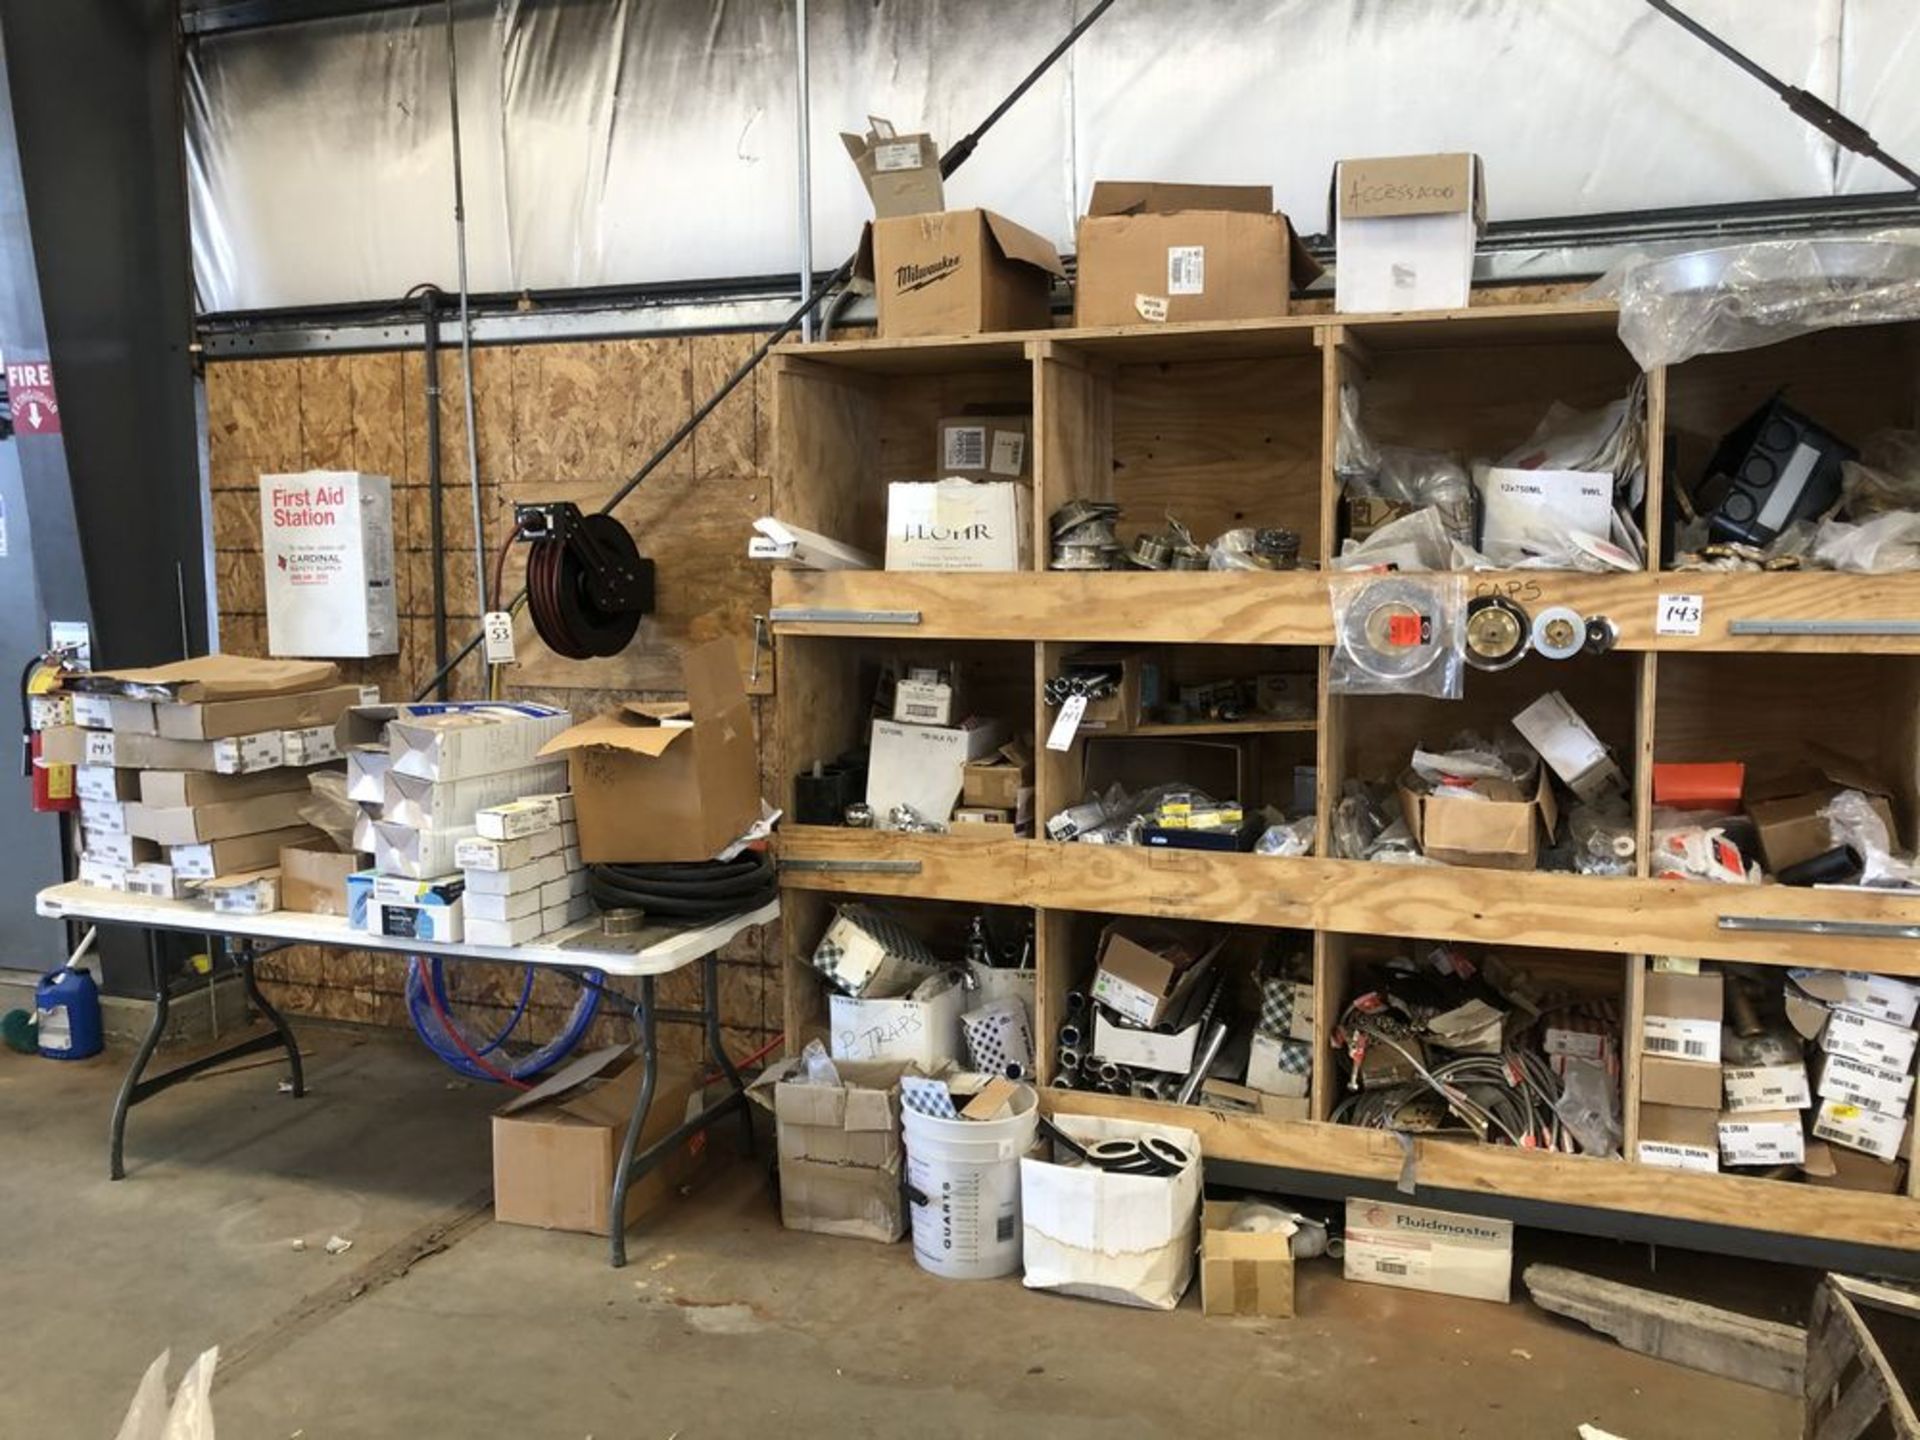 (LOT) INVENTORY CART AND TABLE WITH MISC FLEX HOSES, P TRAPS, DRAINS, DRAIN COVERS, SQUARE COUNTER